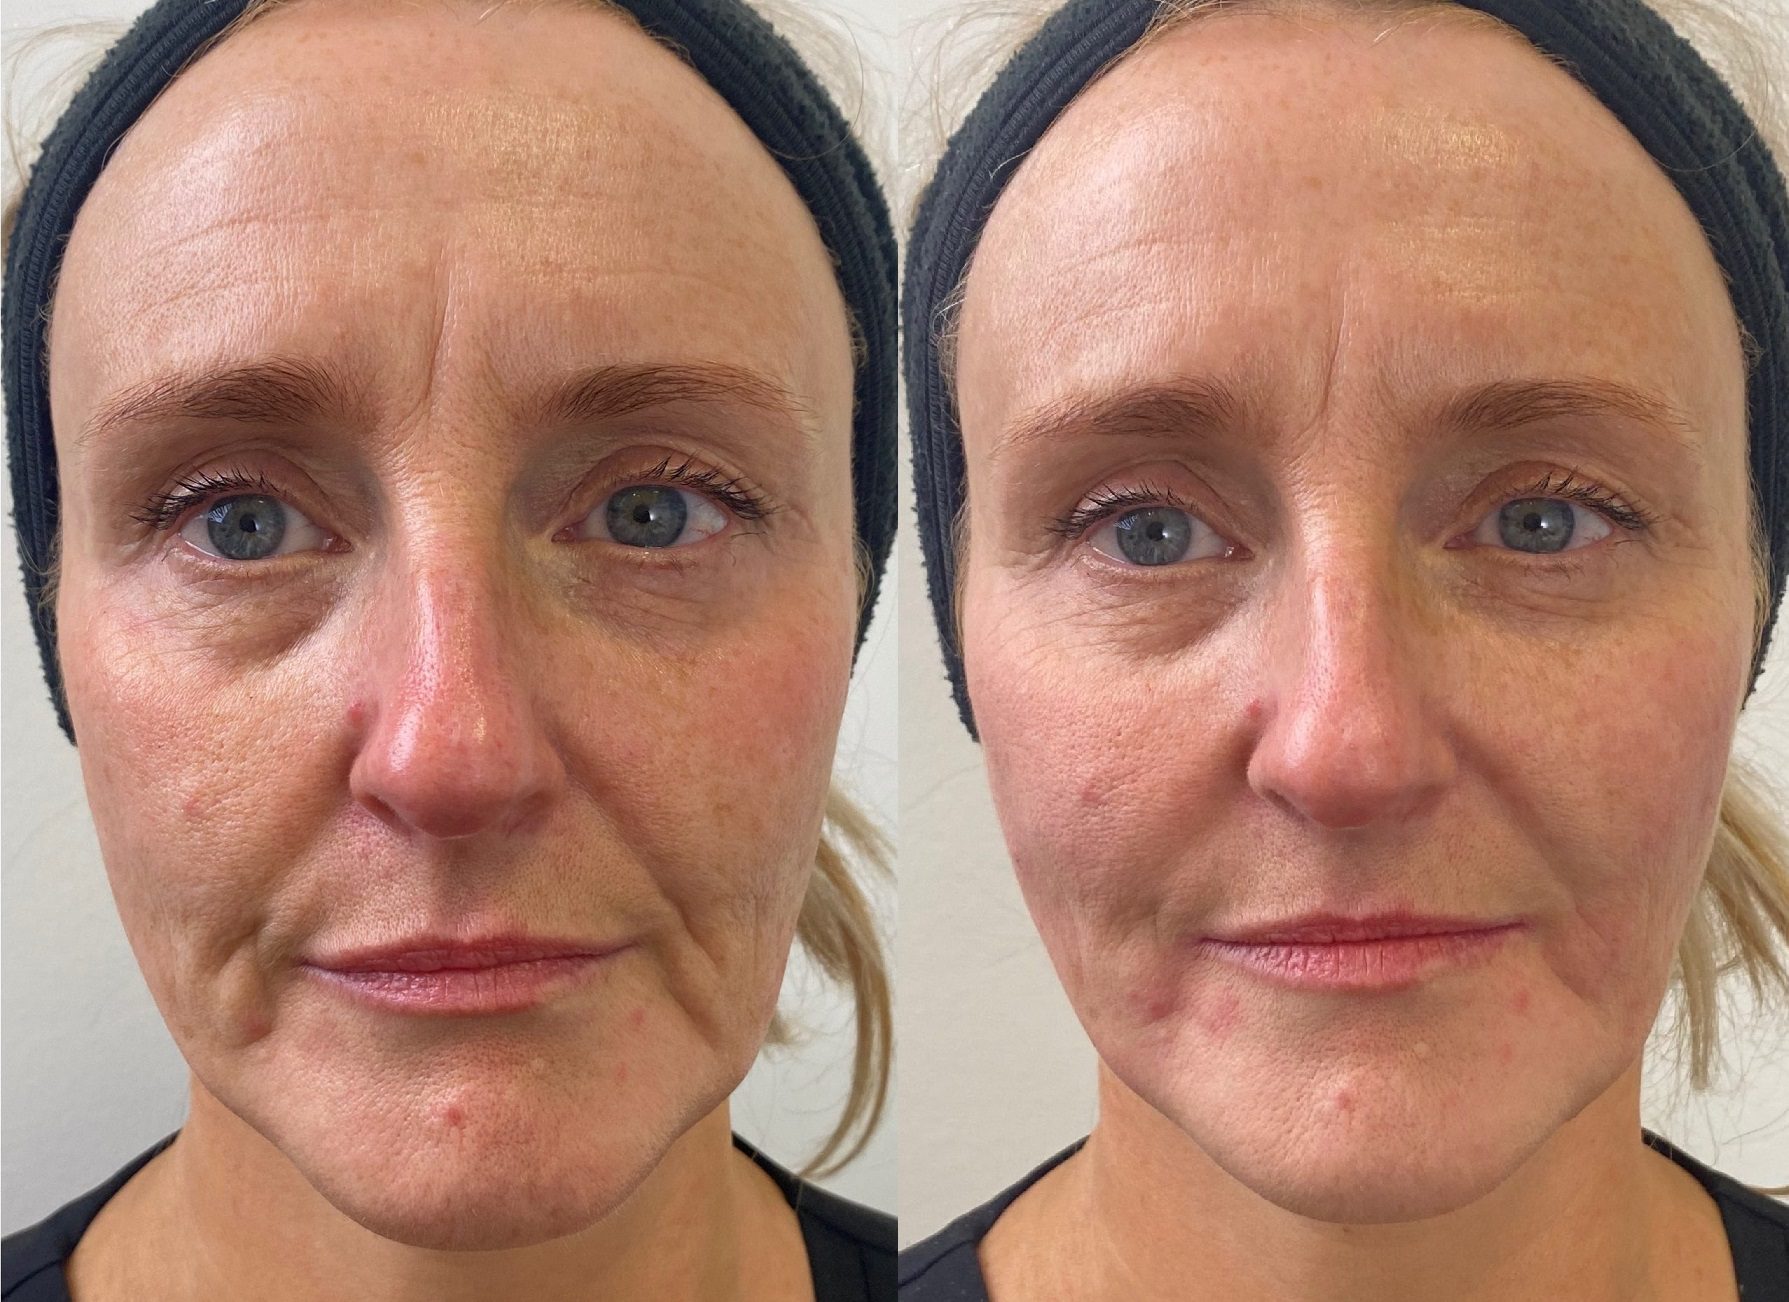 Lower-Face-Lift-with-Dermal-Fillers-Before-and-After-by-Dr-Johanna-Ward